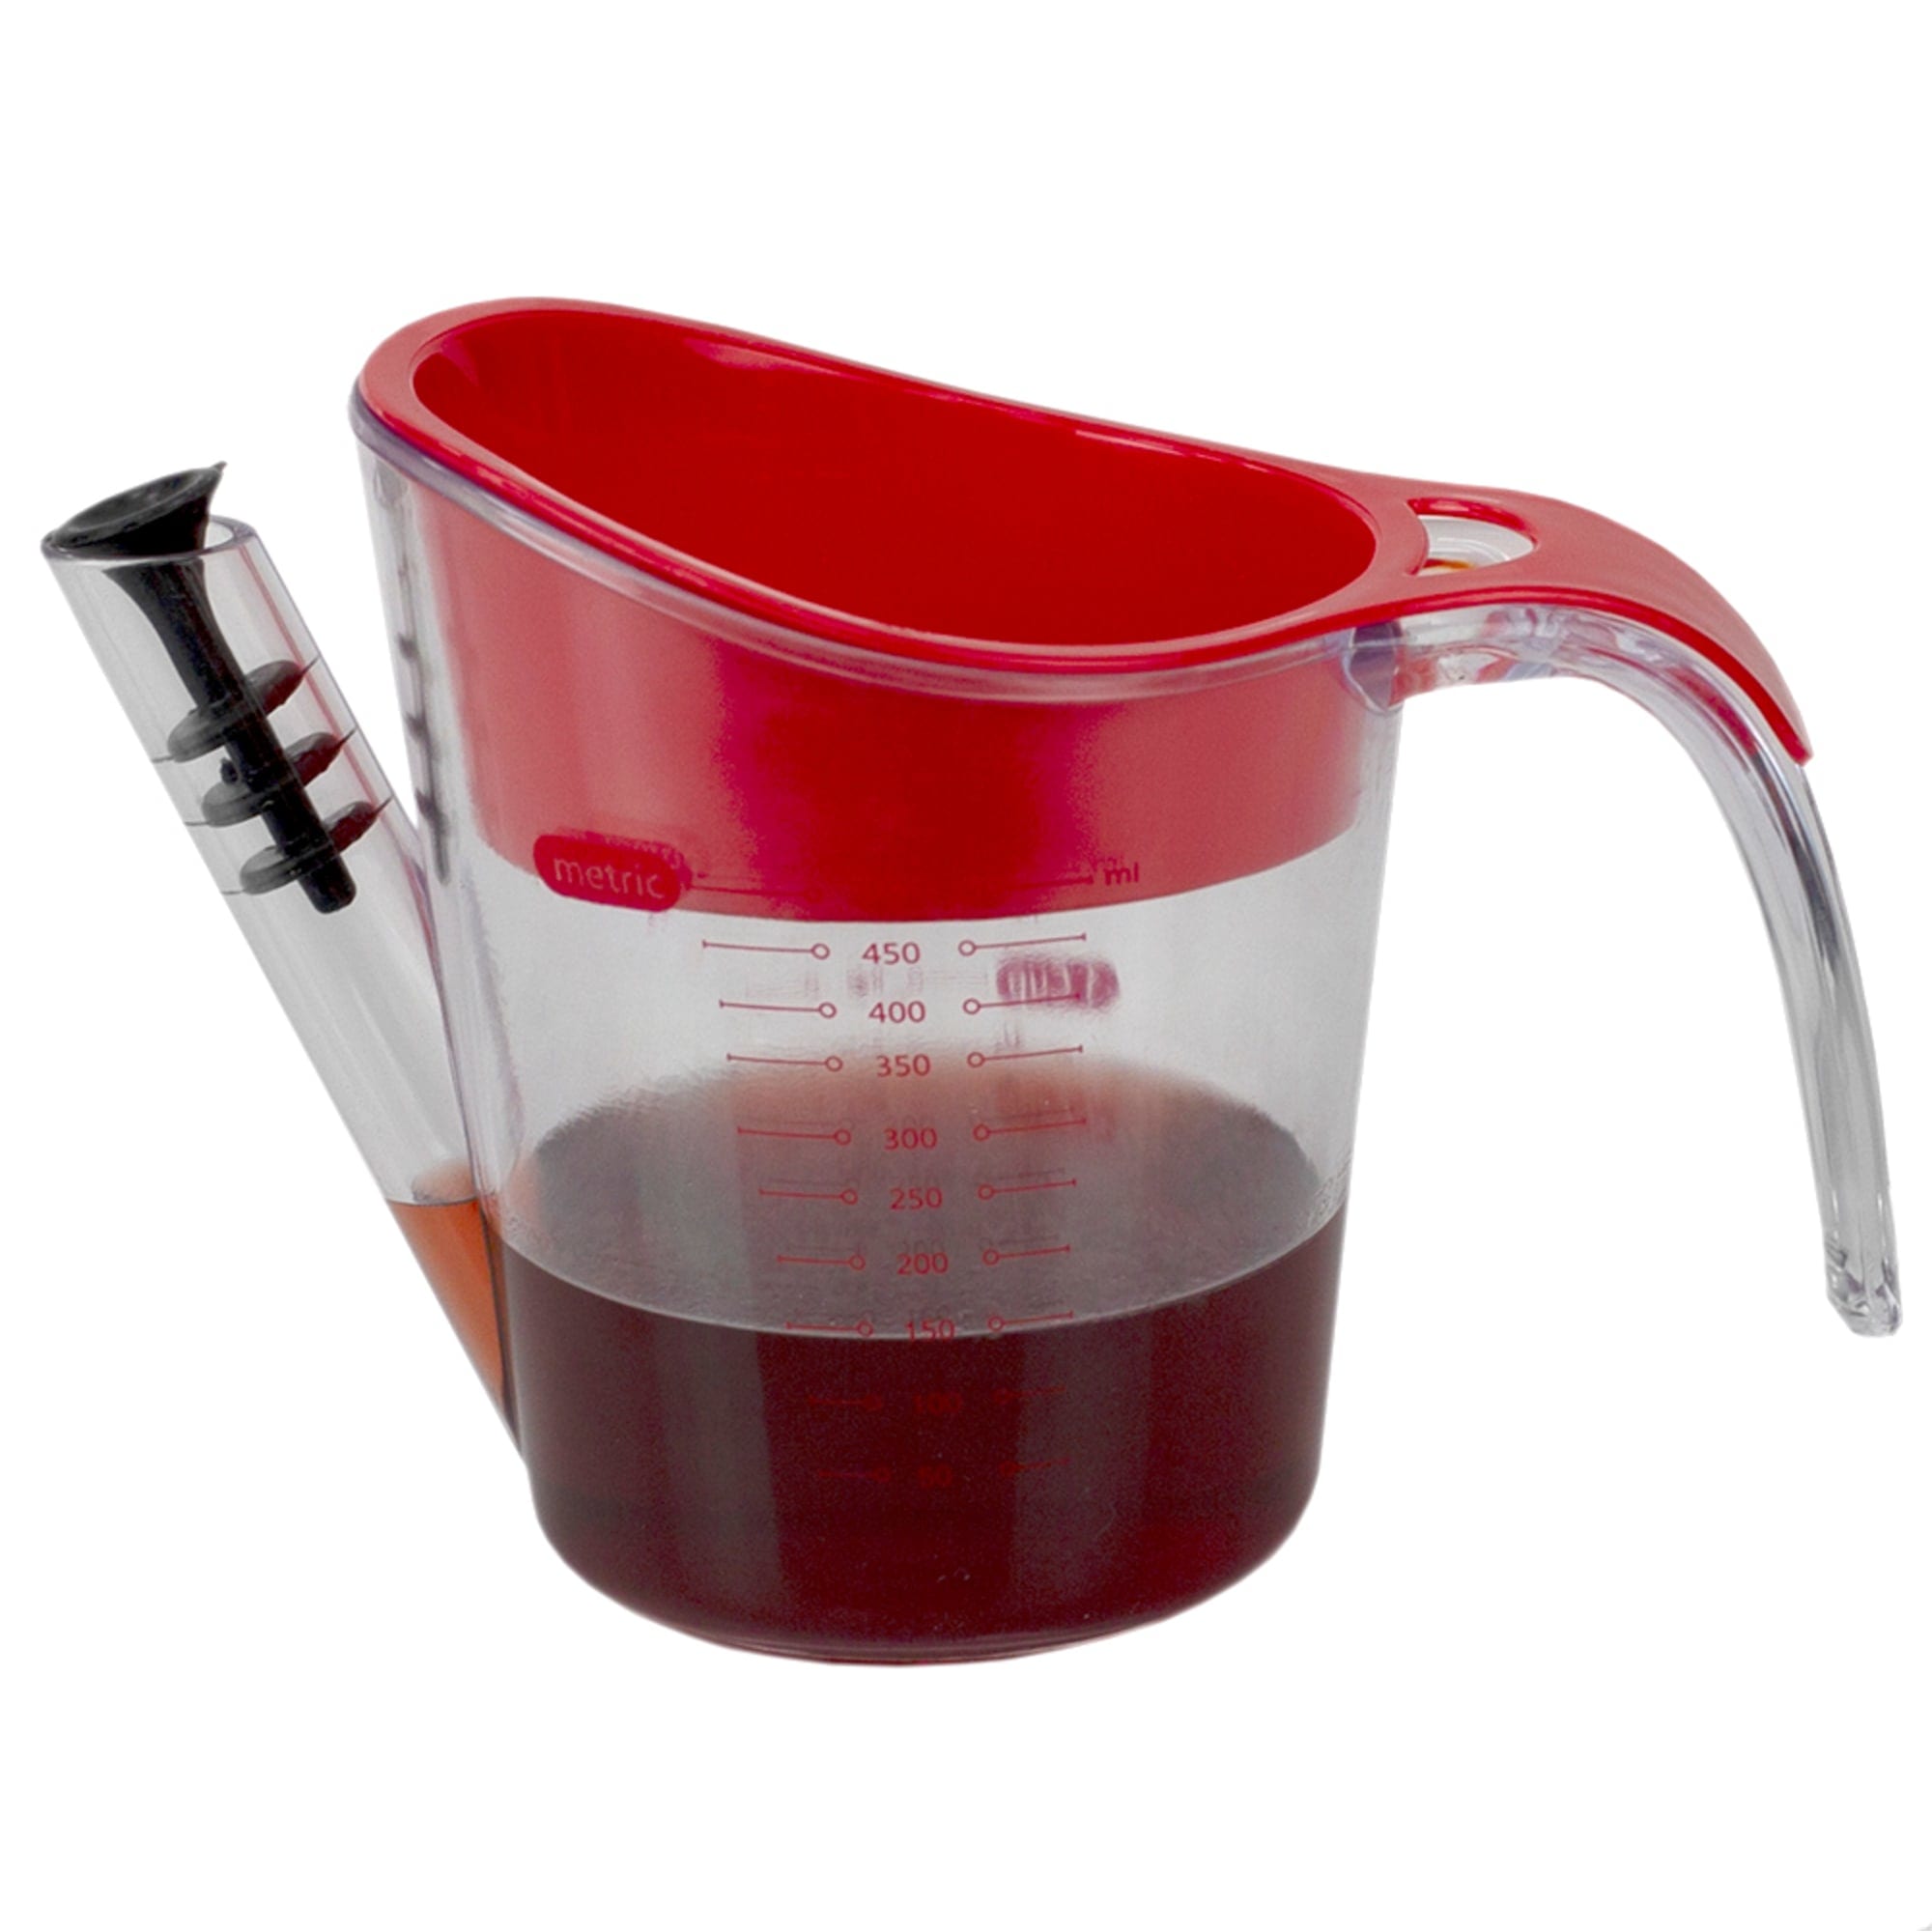 Home Basics 2 Cup Plastic Fat Separator Easy Grip Handle, Red $4.00 EACH, CASE PACK OF 12